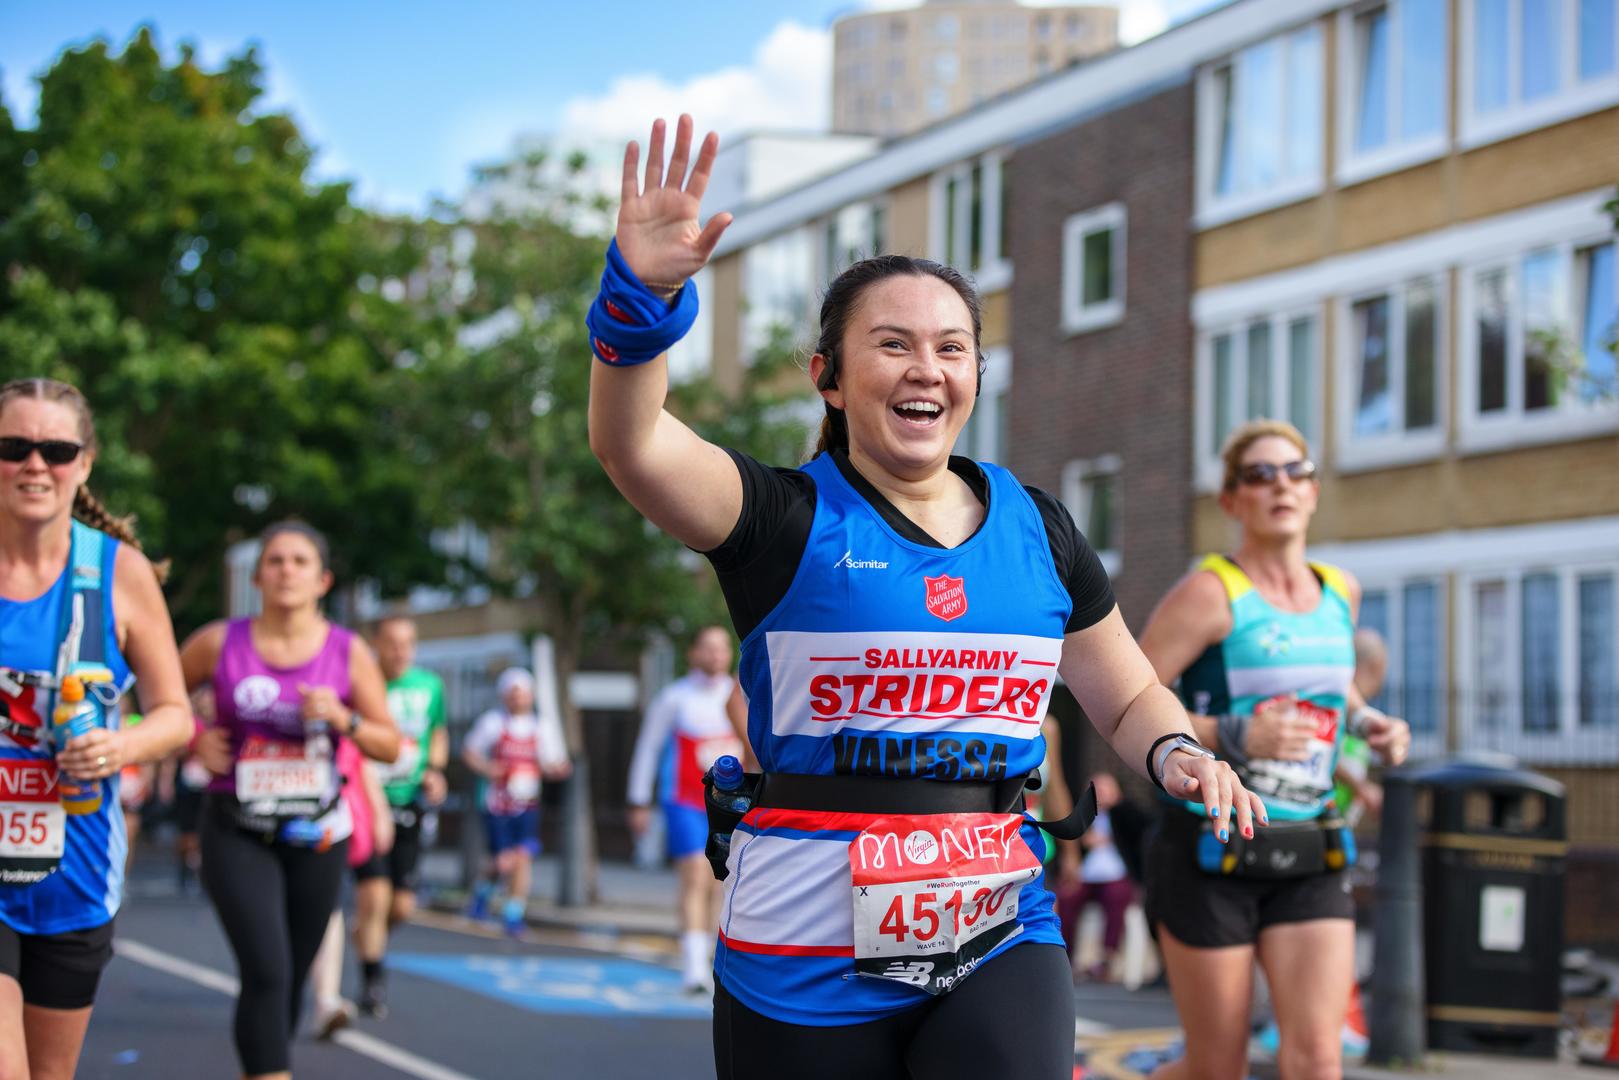 A woman smiling and waving at the camera as she runs the London Marathon to raise money for our homelessness services